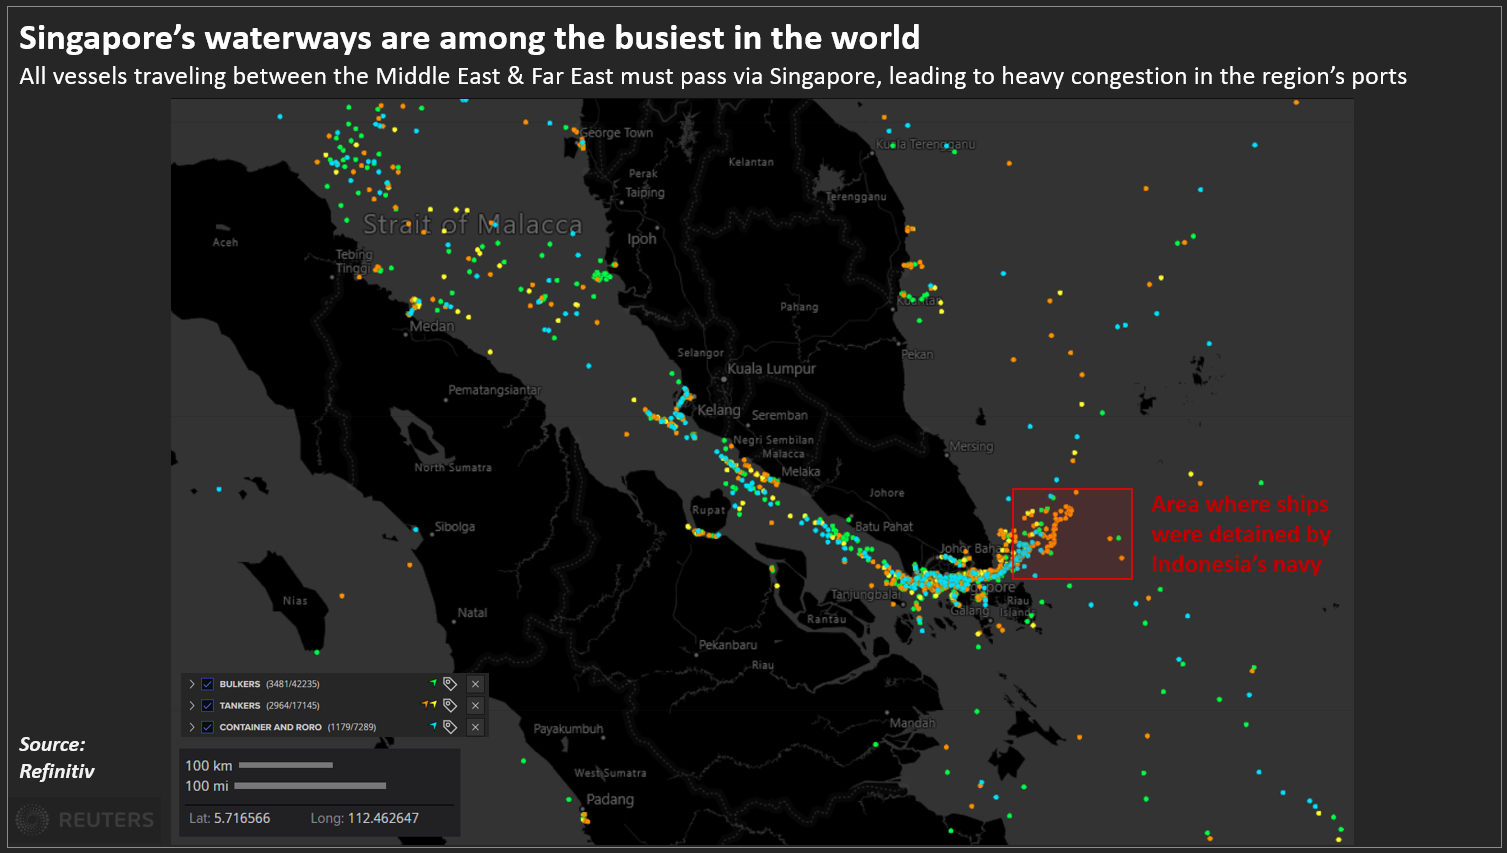 Singapore's waterways are among the busiest in the world